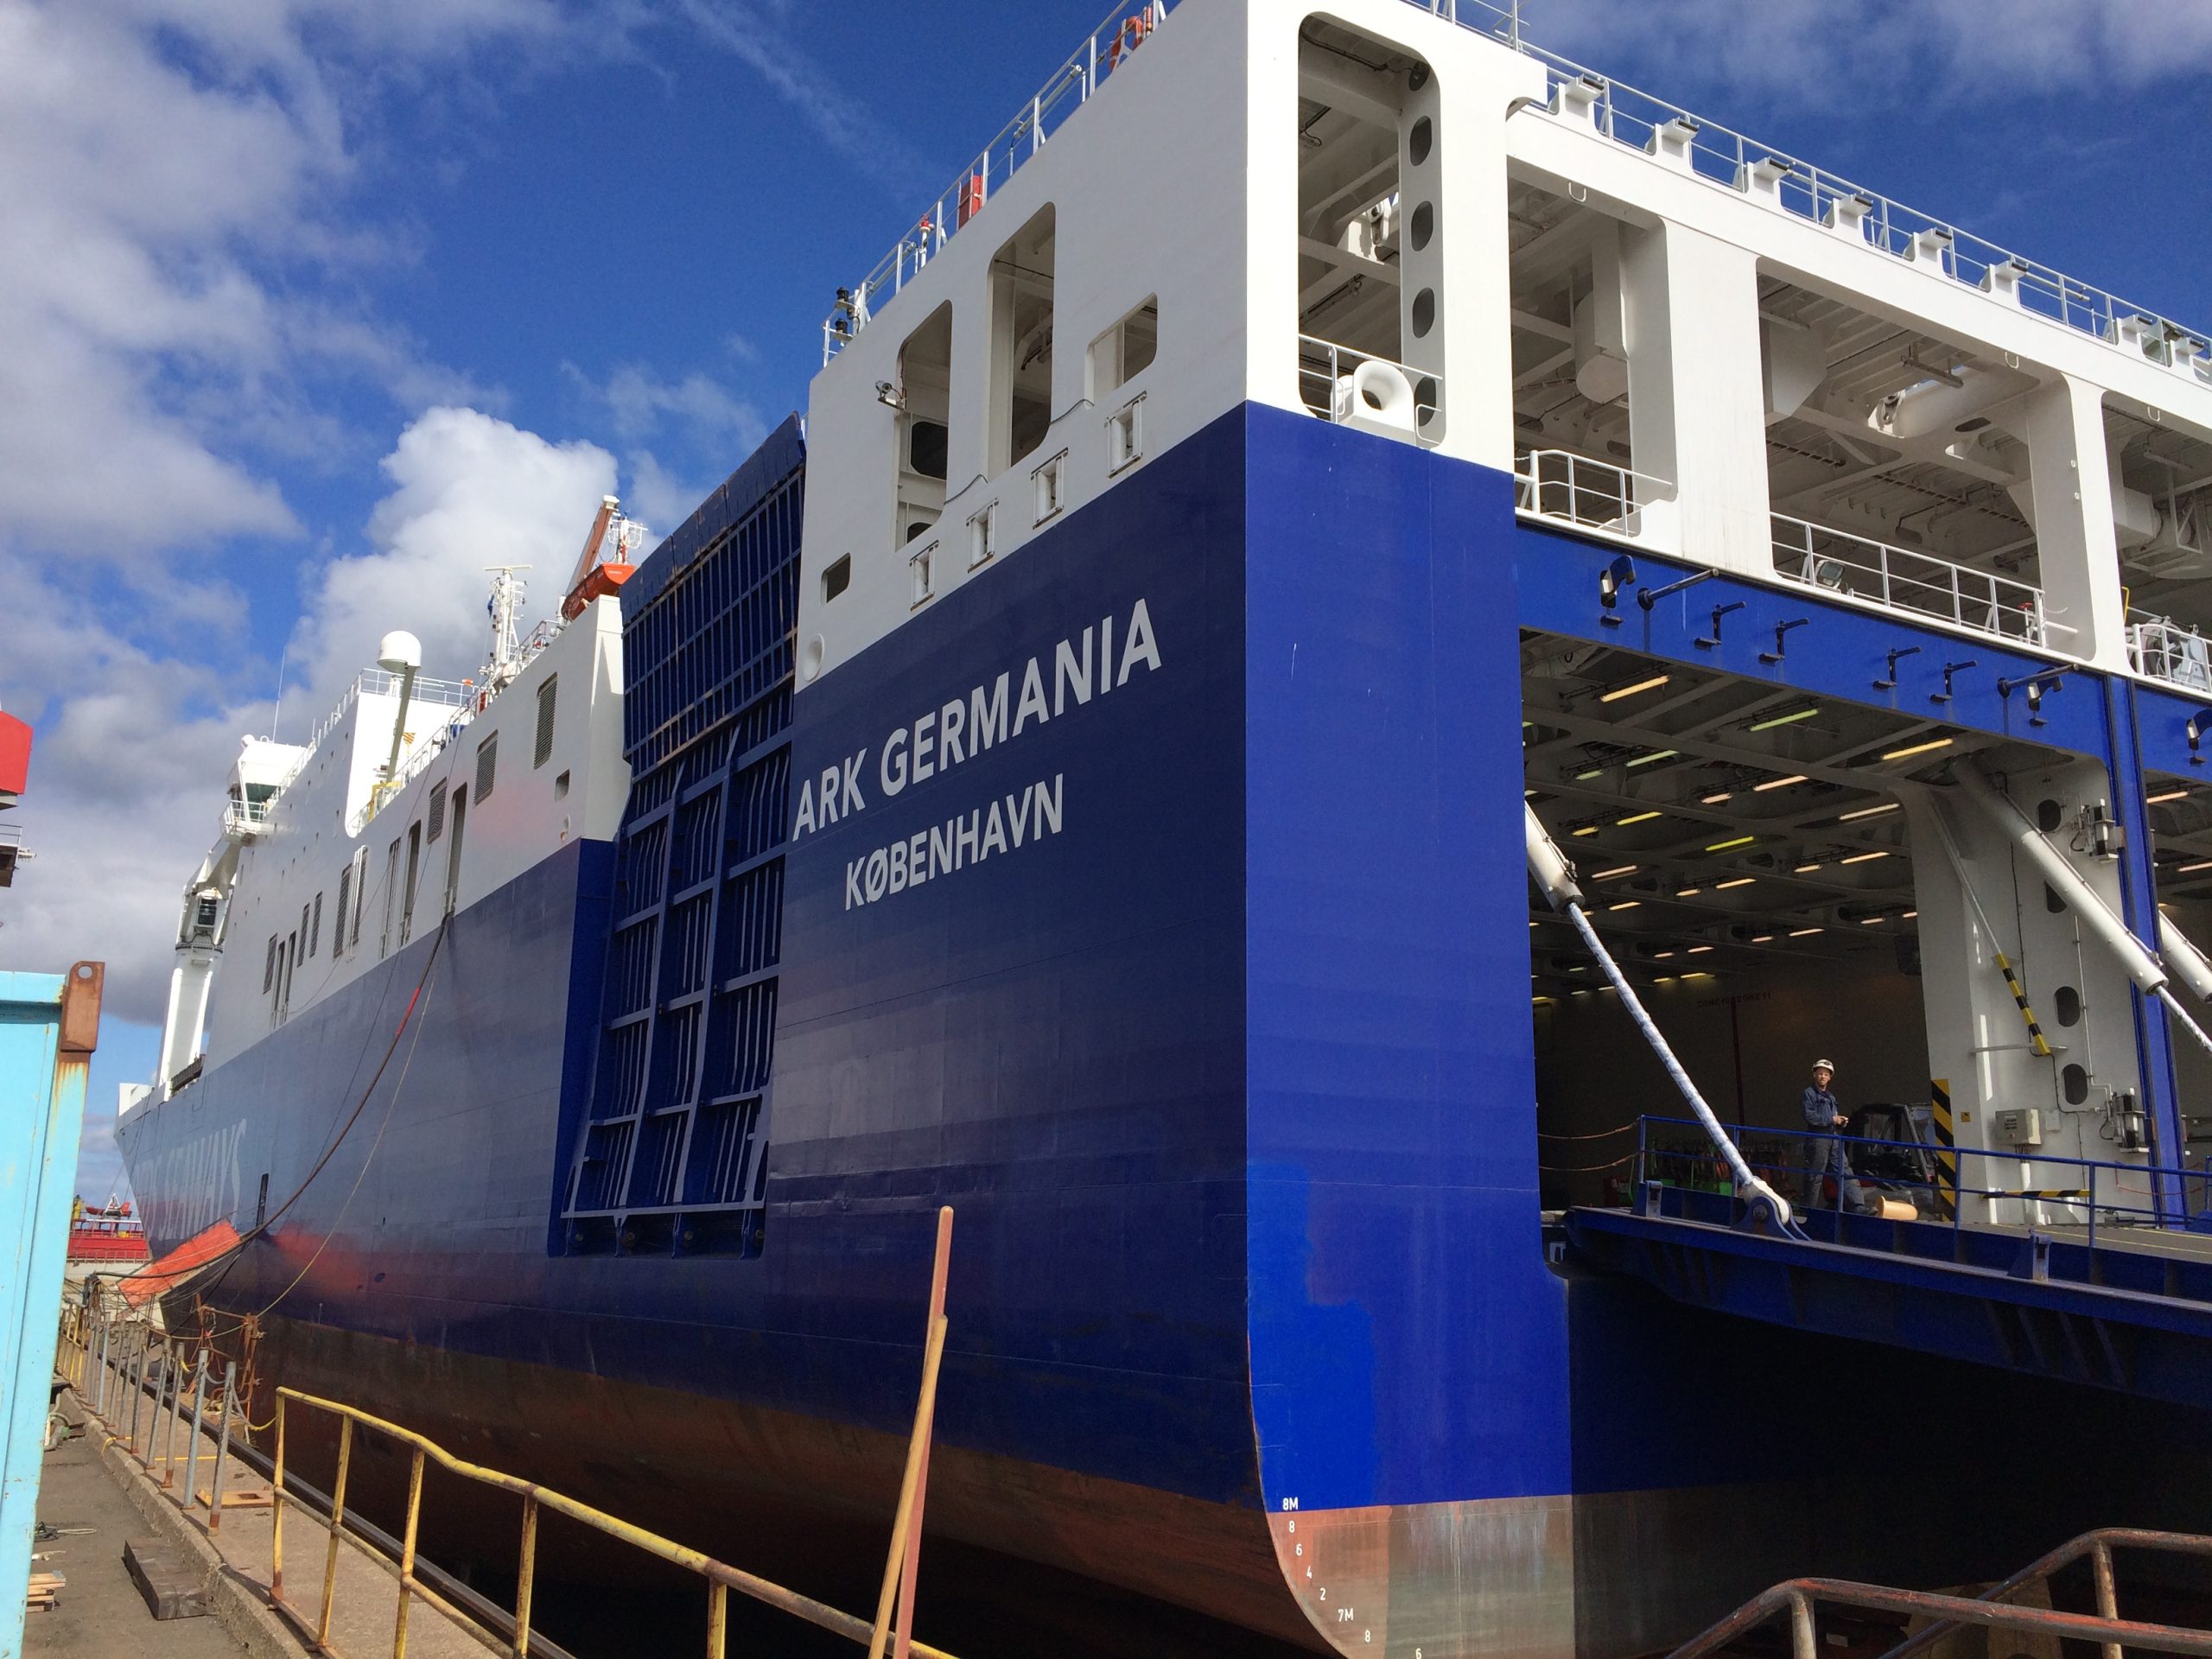 Ark Germania a vessel in the DFDS fleet taking action to be more sustainable